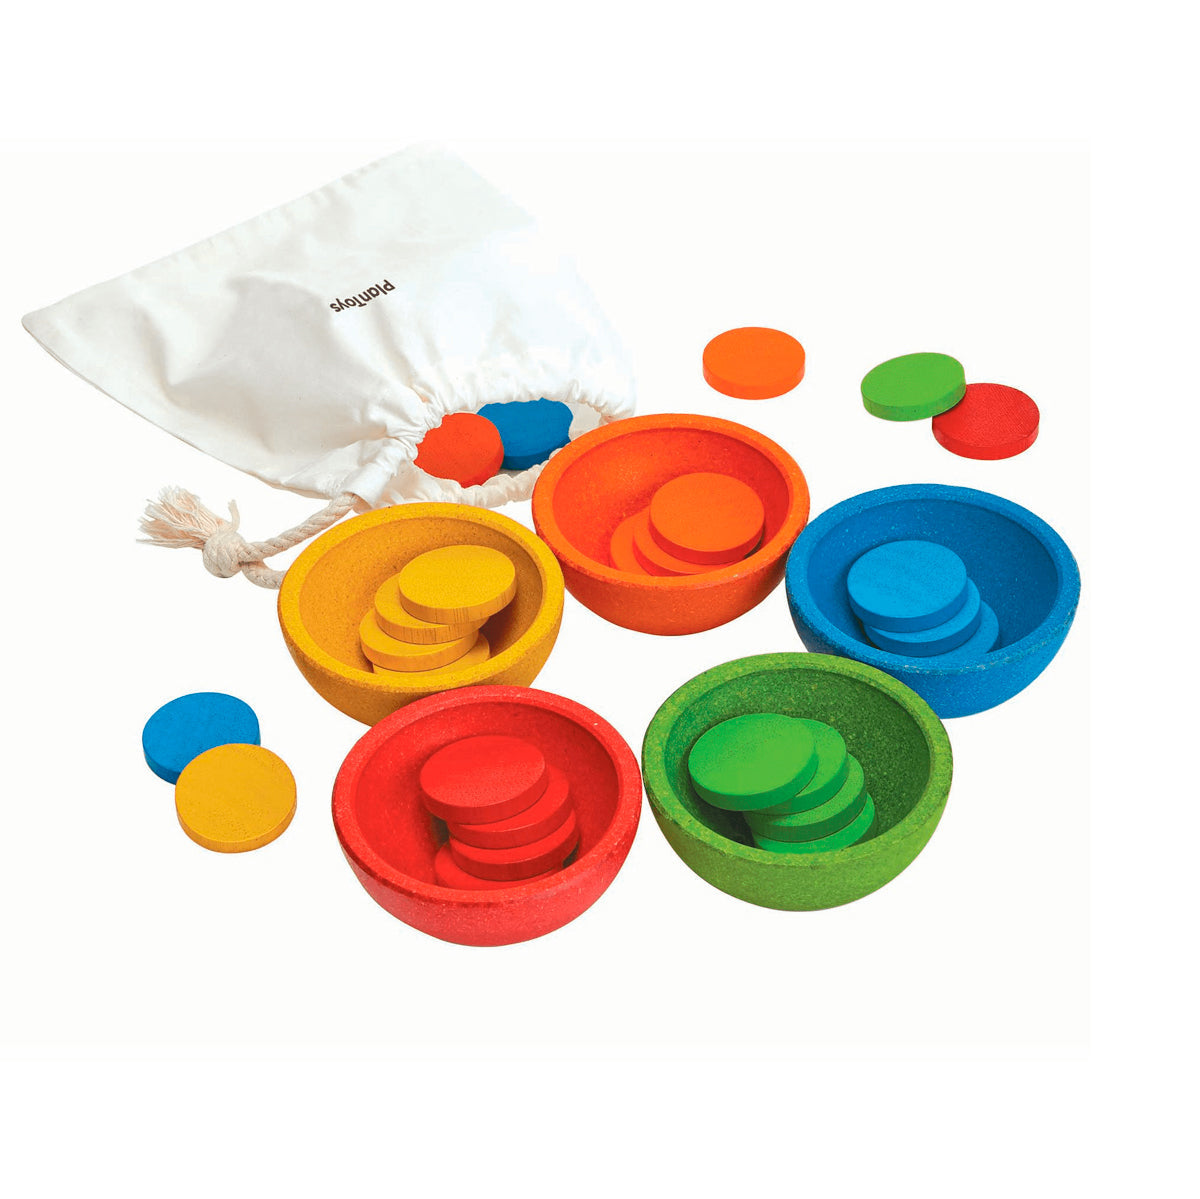 Pan toys Sort and Count Cups Montessori colour matching game